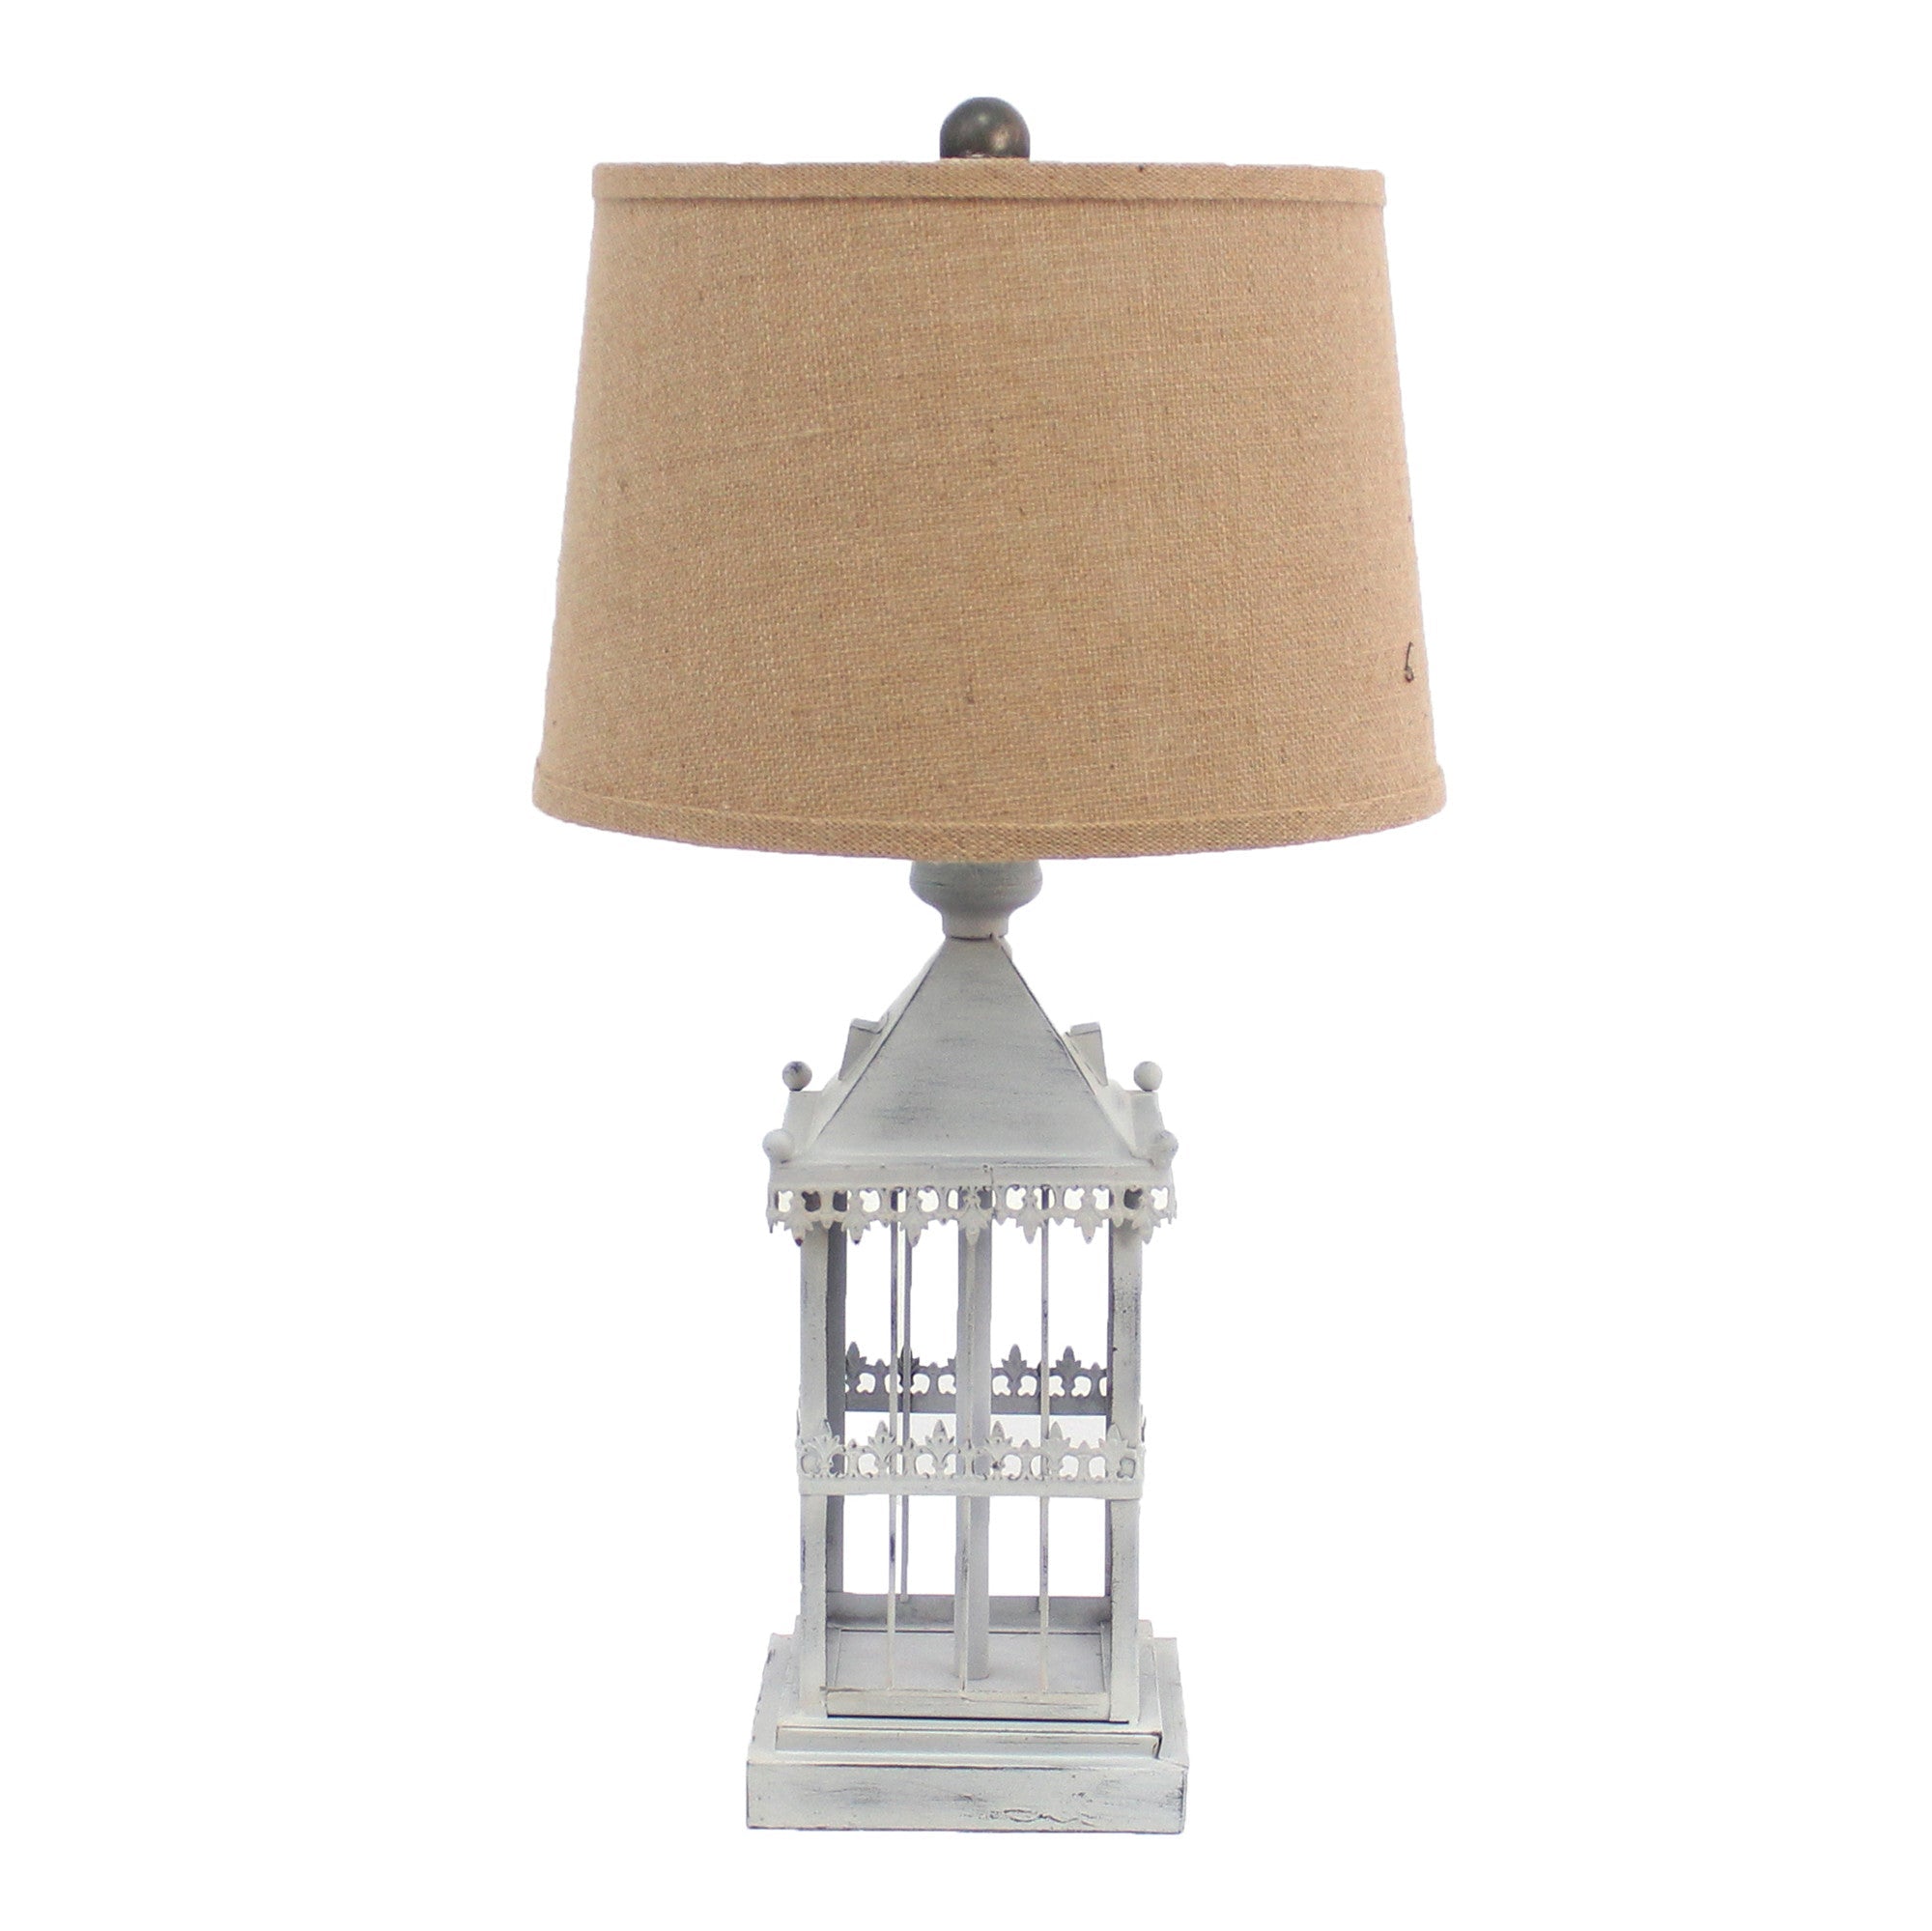 15 X 12 X 25.75 Gray Country Cottage Castle - Table Lamp - Tuesday Morning-Table Lamps